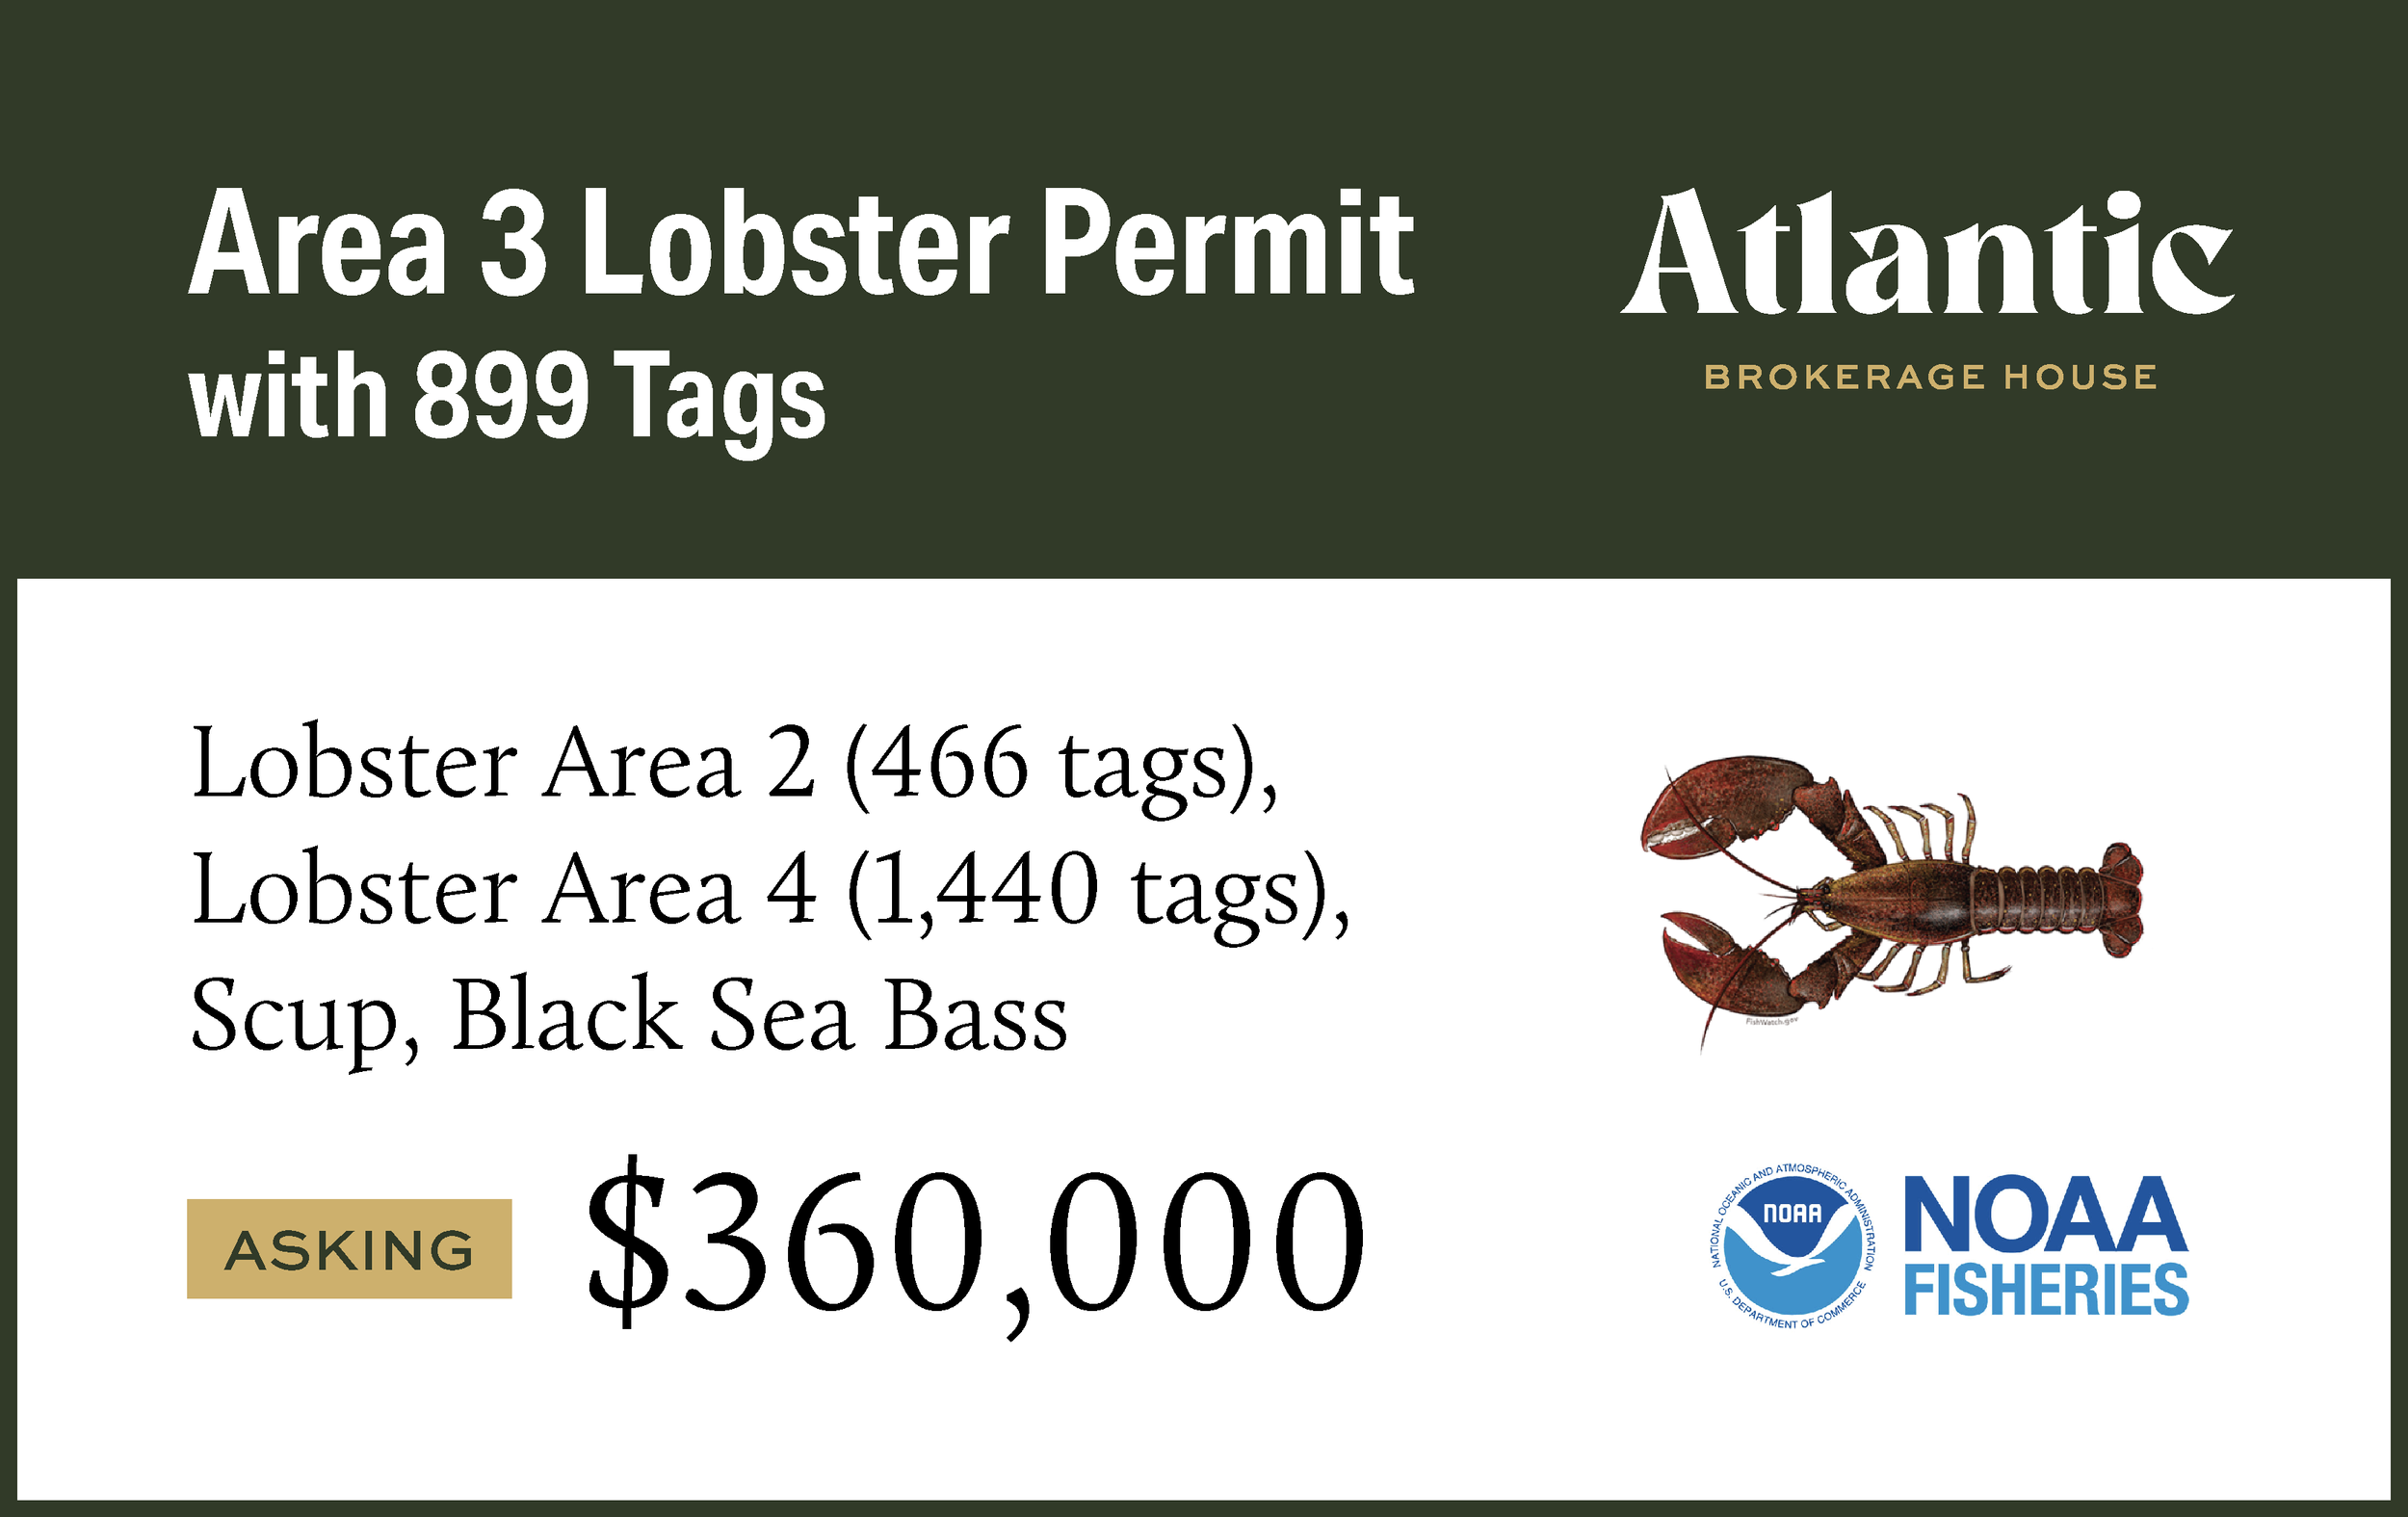 ABH_A3LobsterPermits_360K.png